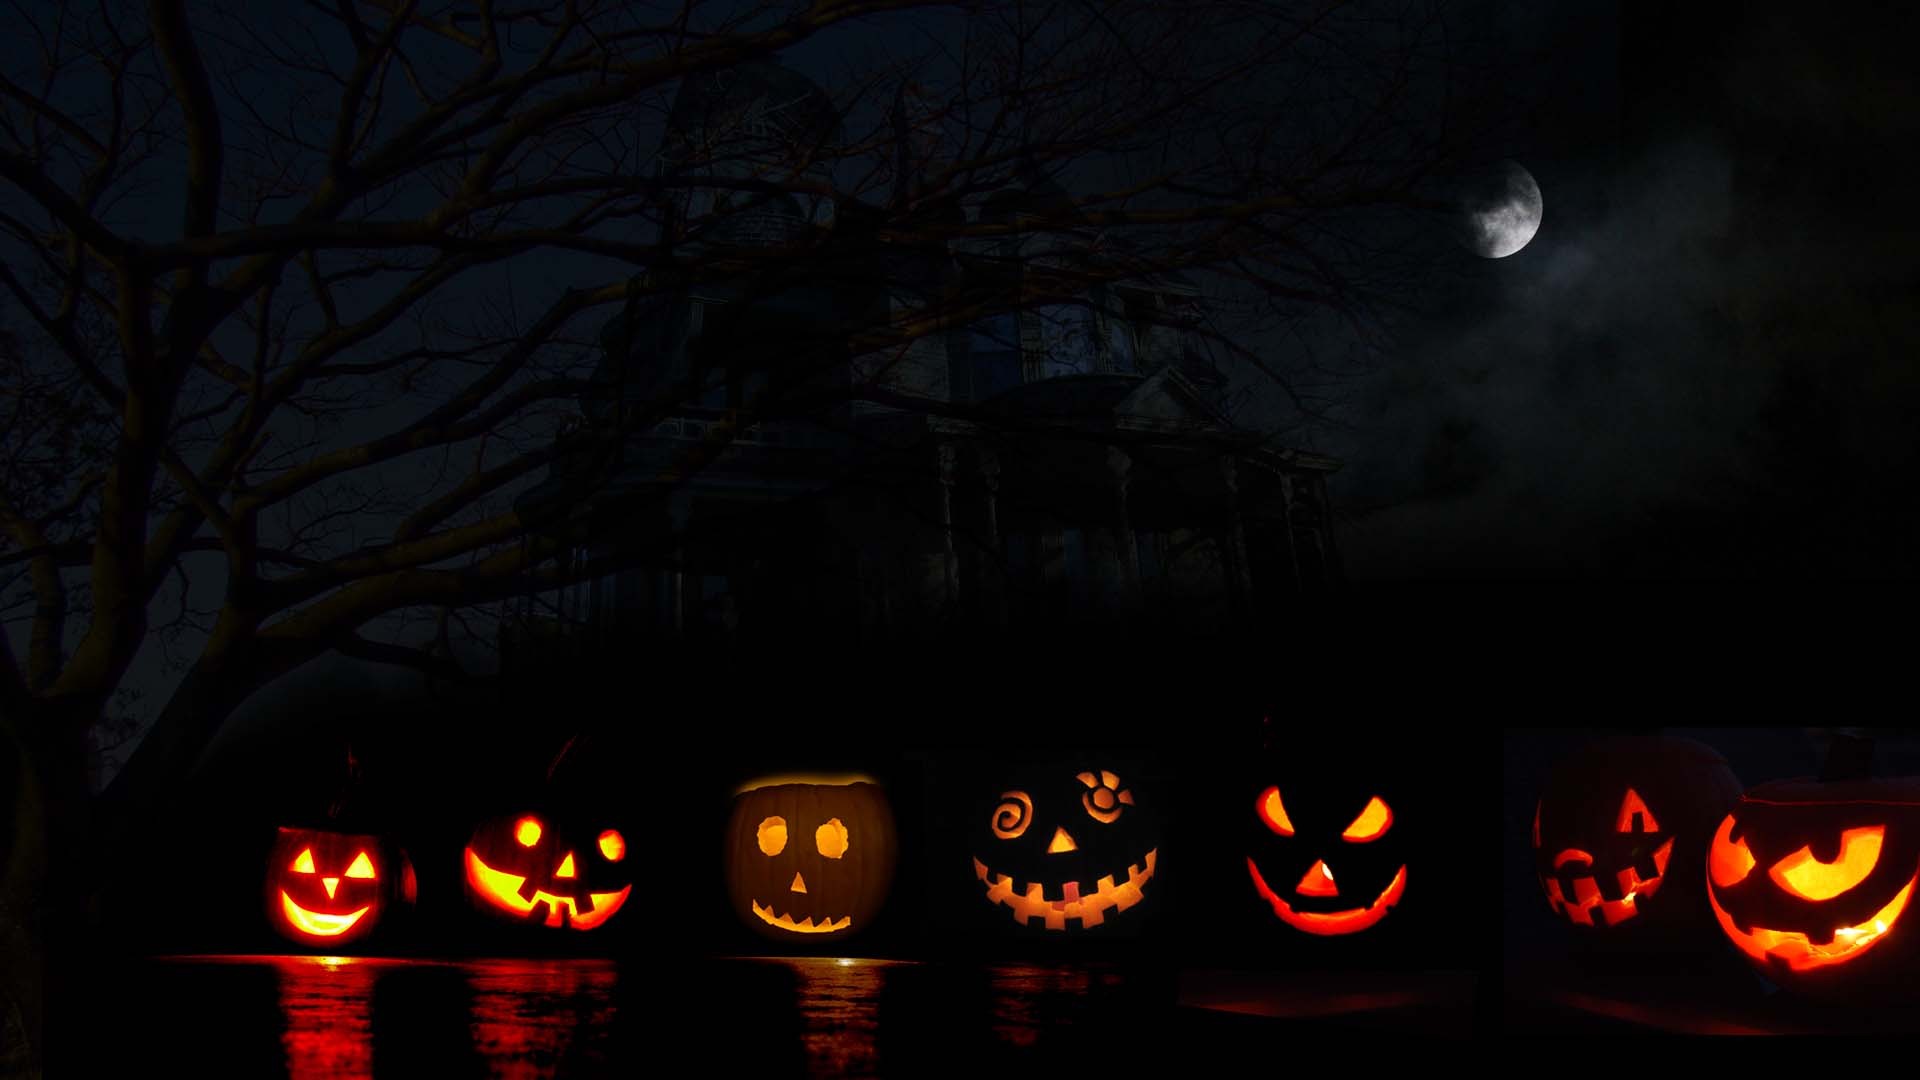 Free download Halloween Backgrounds | Wallpapers, Backgrounds ...